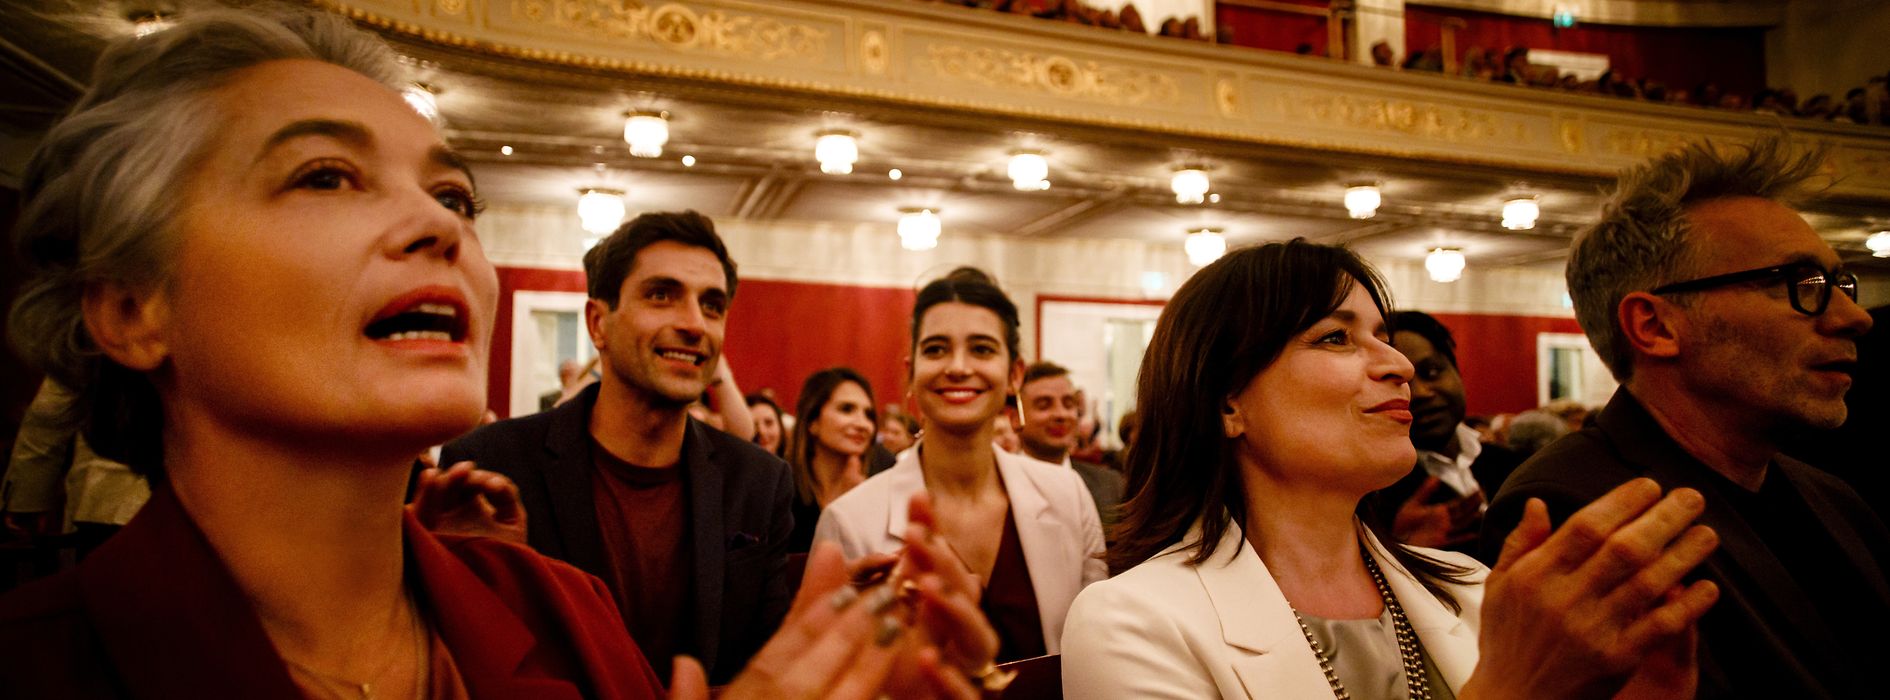 Audience clapping in the Wiener Konzerthaus